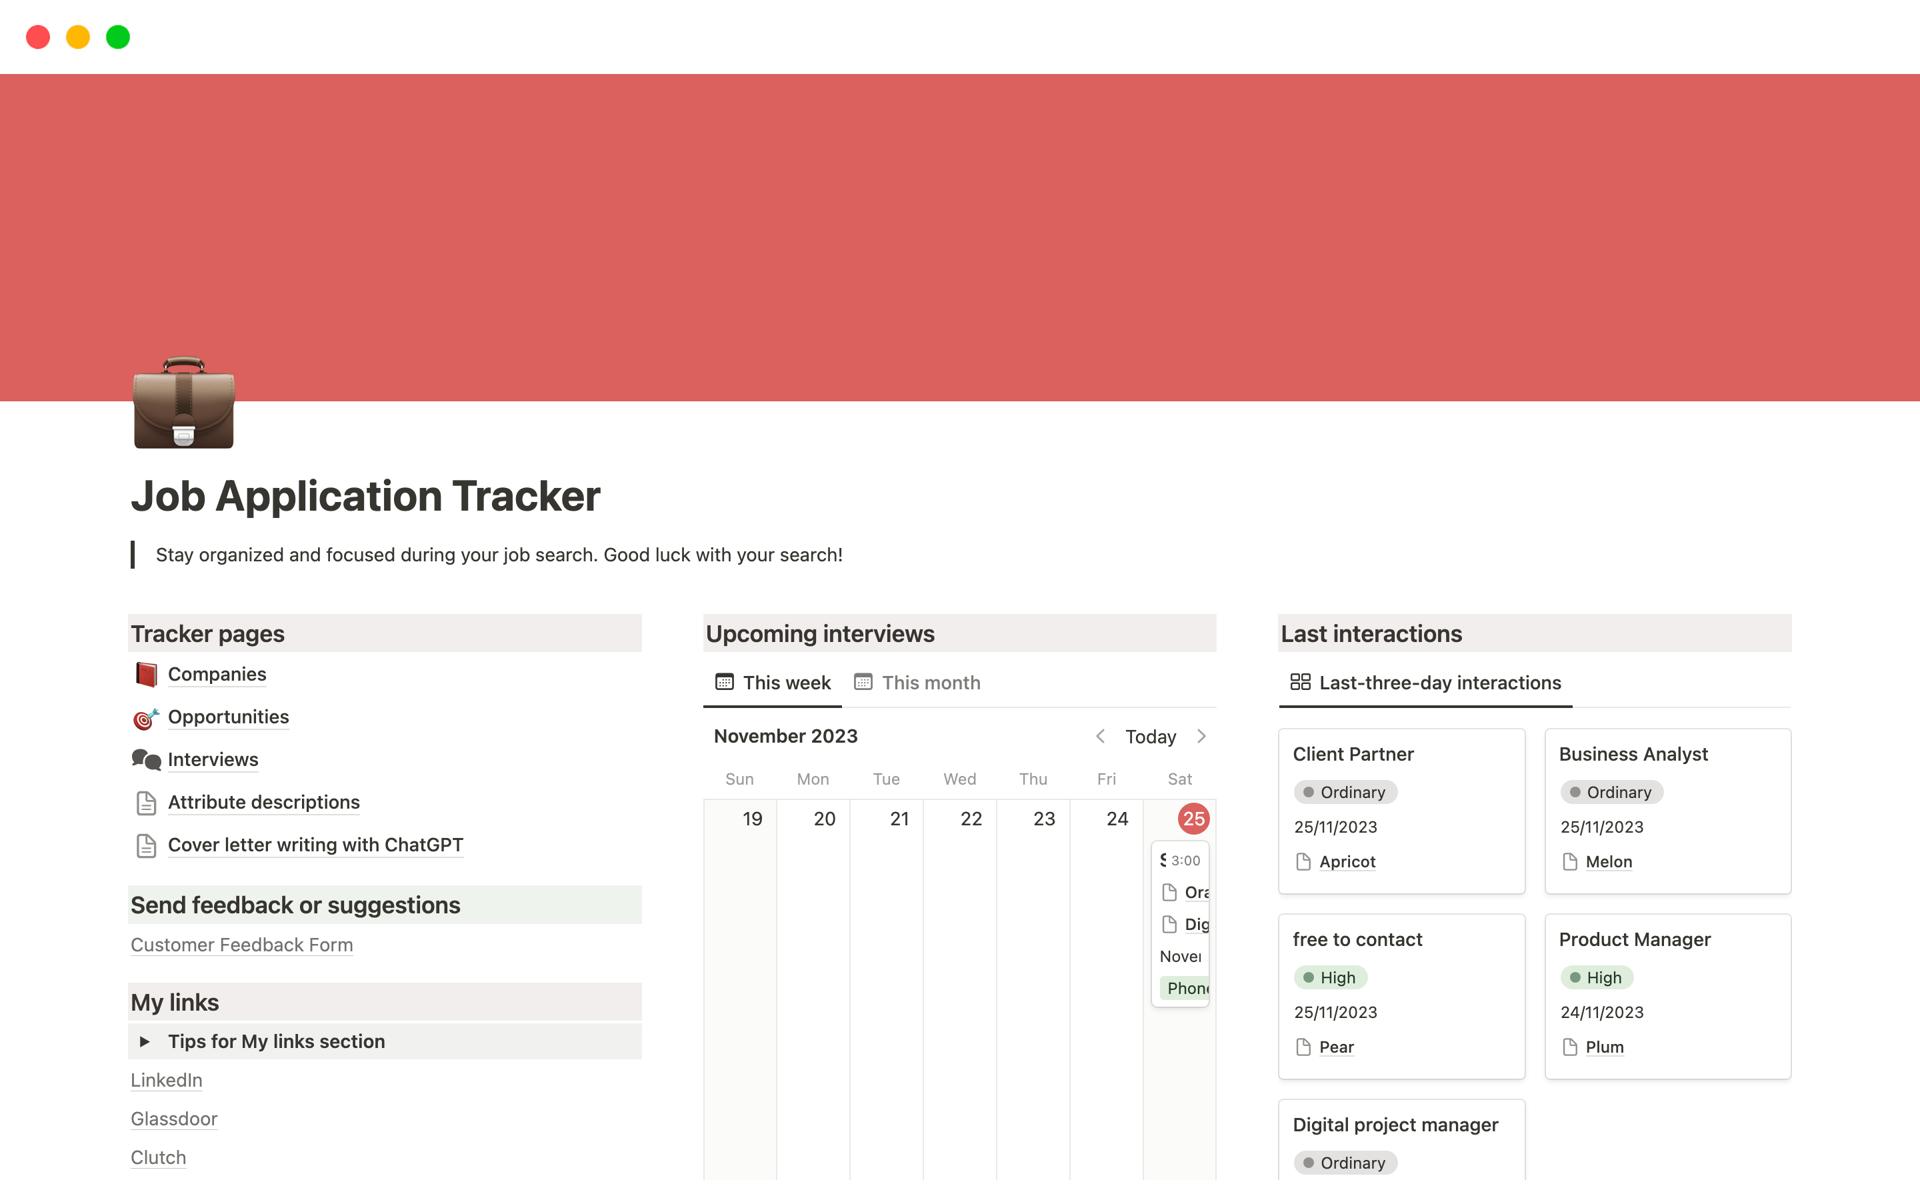 Job Tracker Template for Notion: Stay organized and focused during your job search with this comprehensive tracker template.